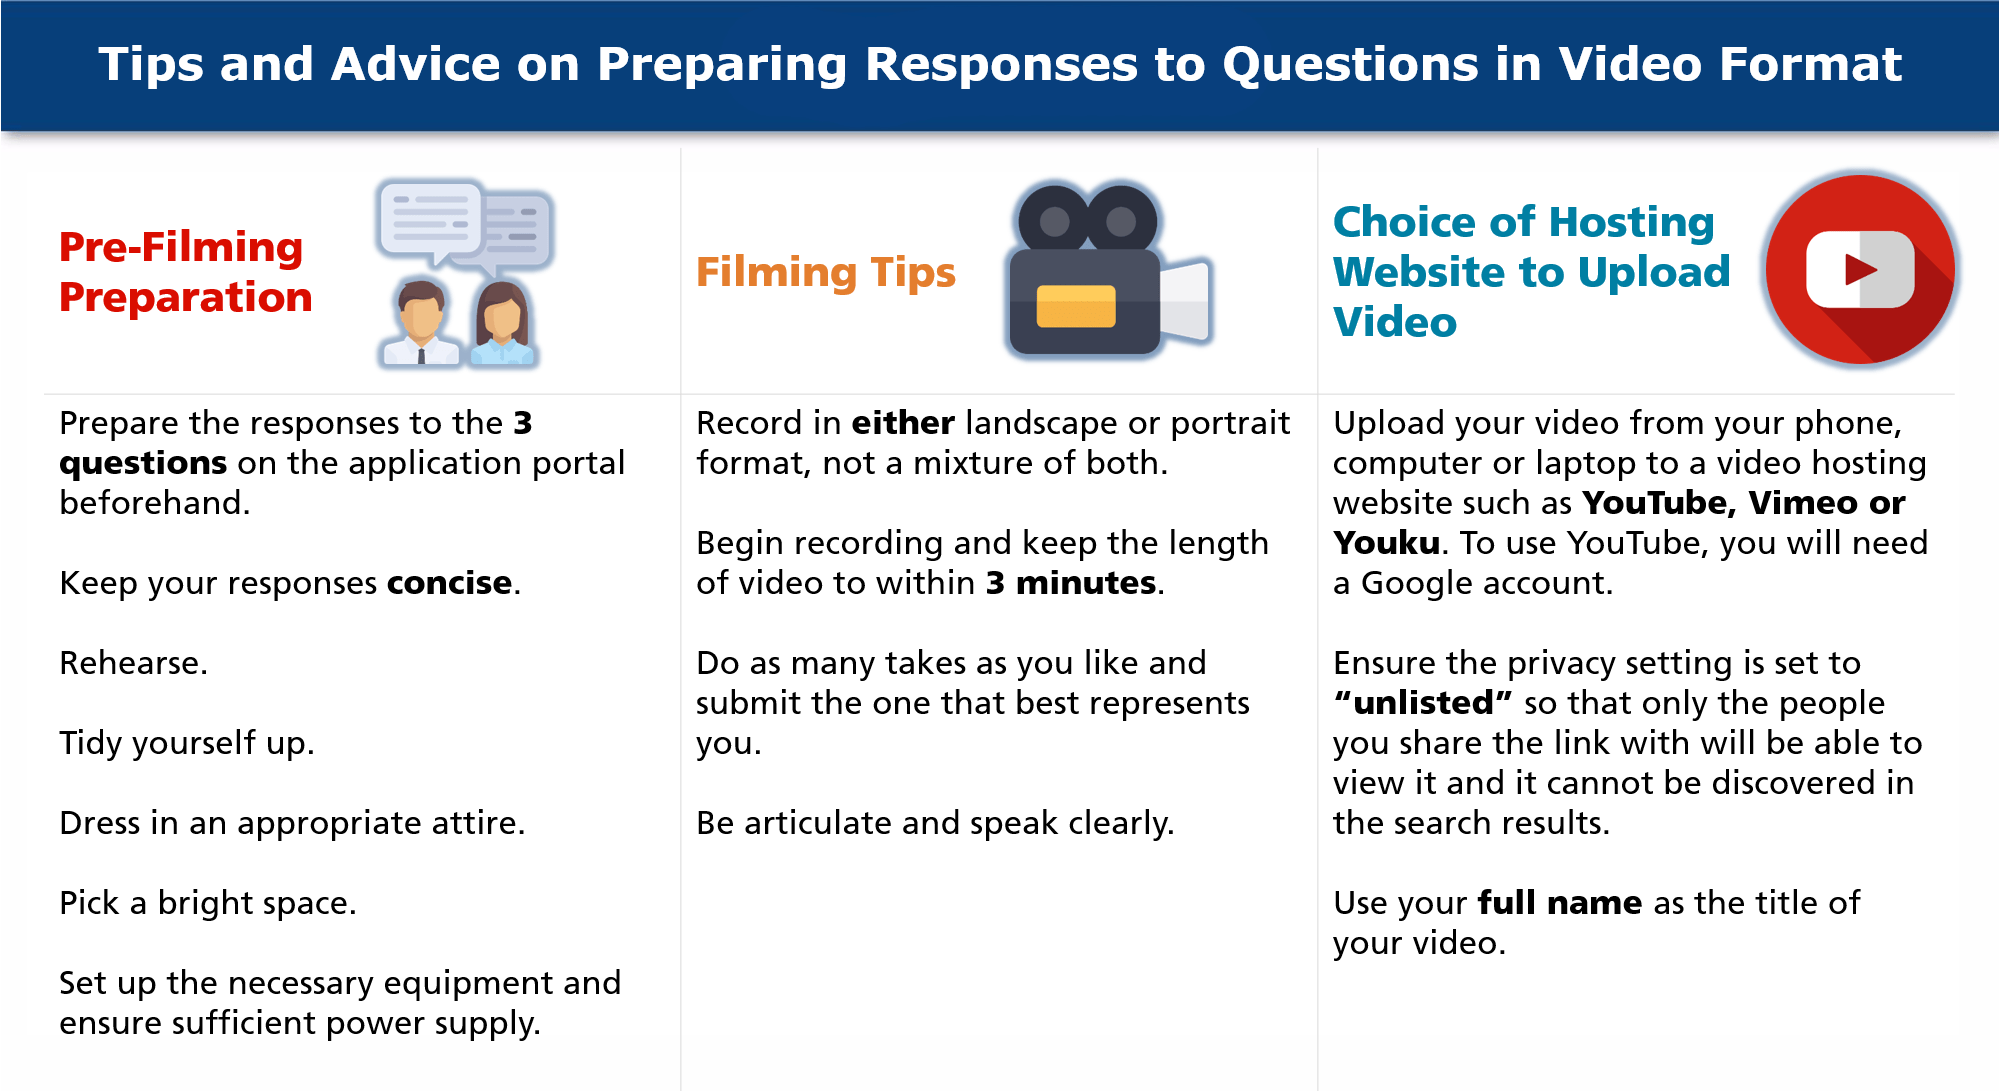 Tips and Advices on Preparing Responses to Questions in Video Format